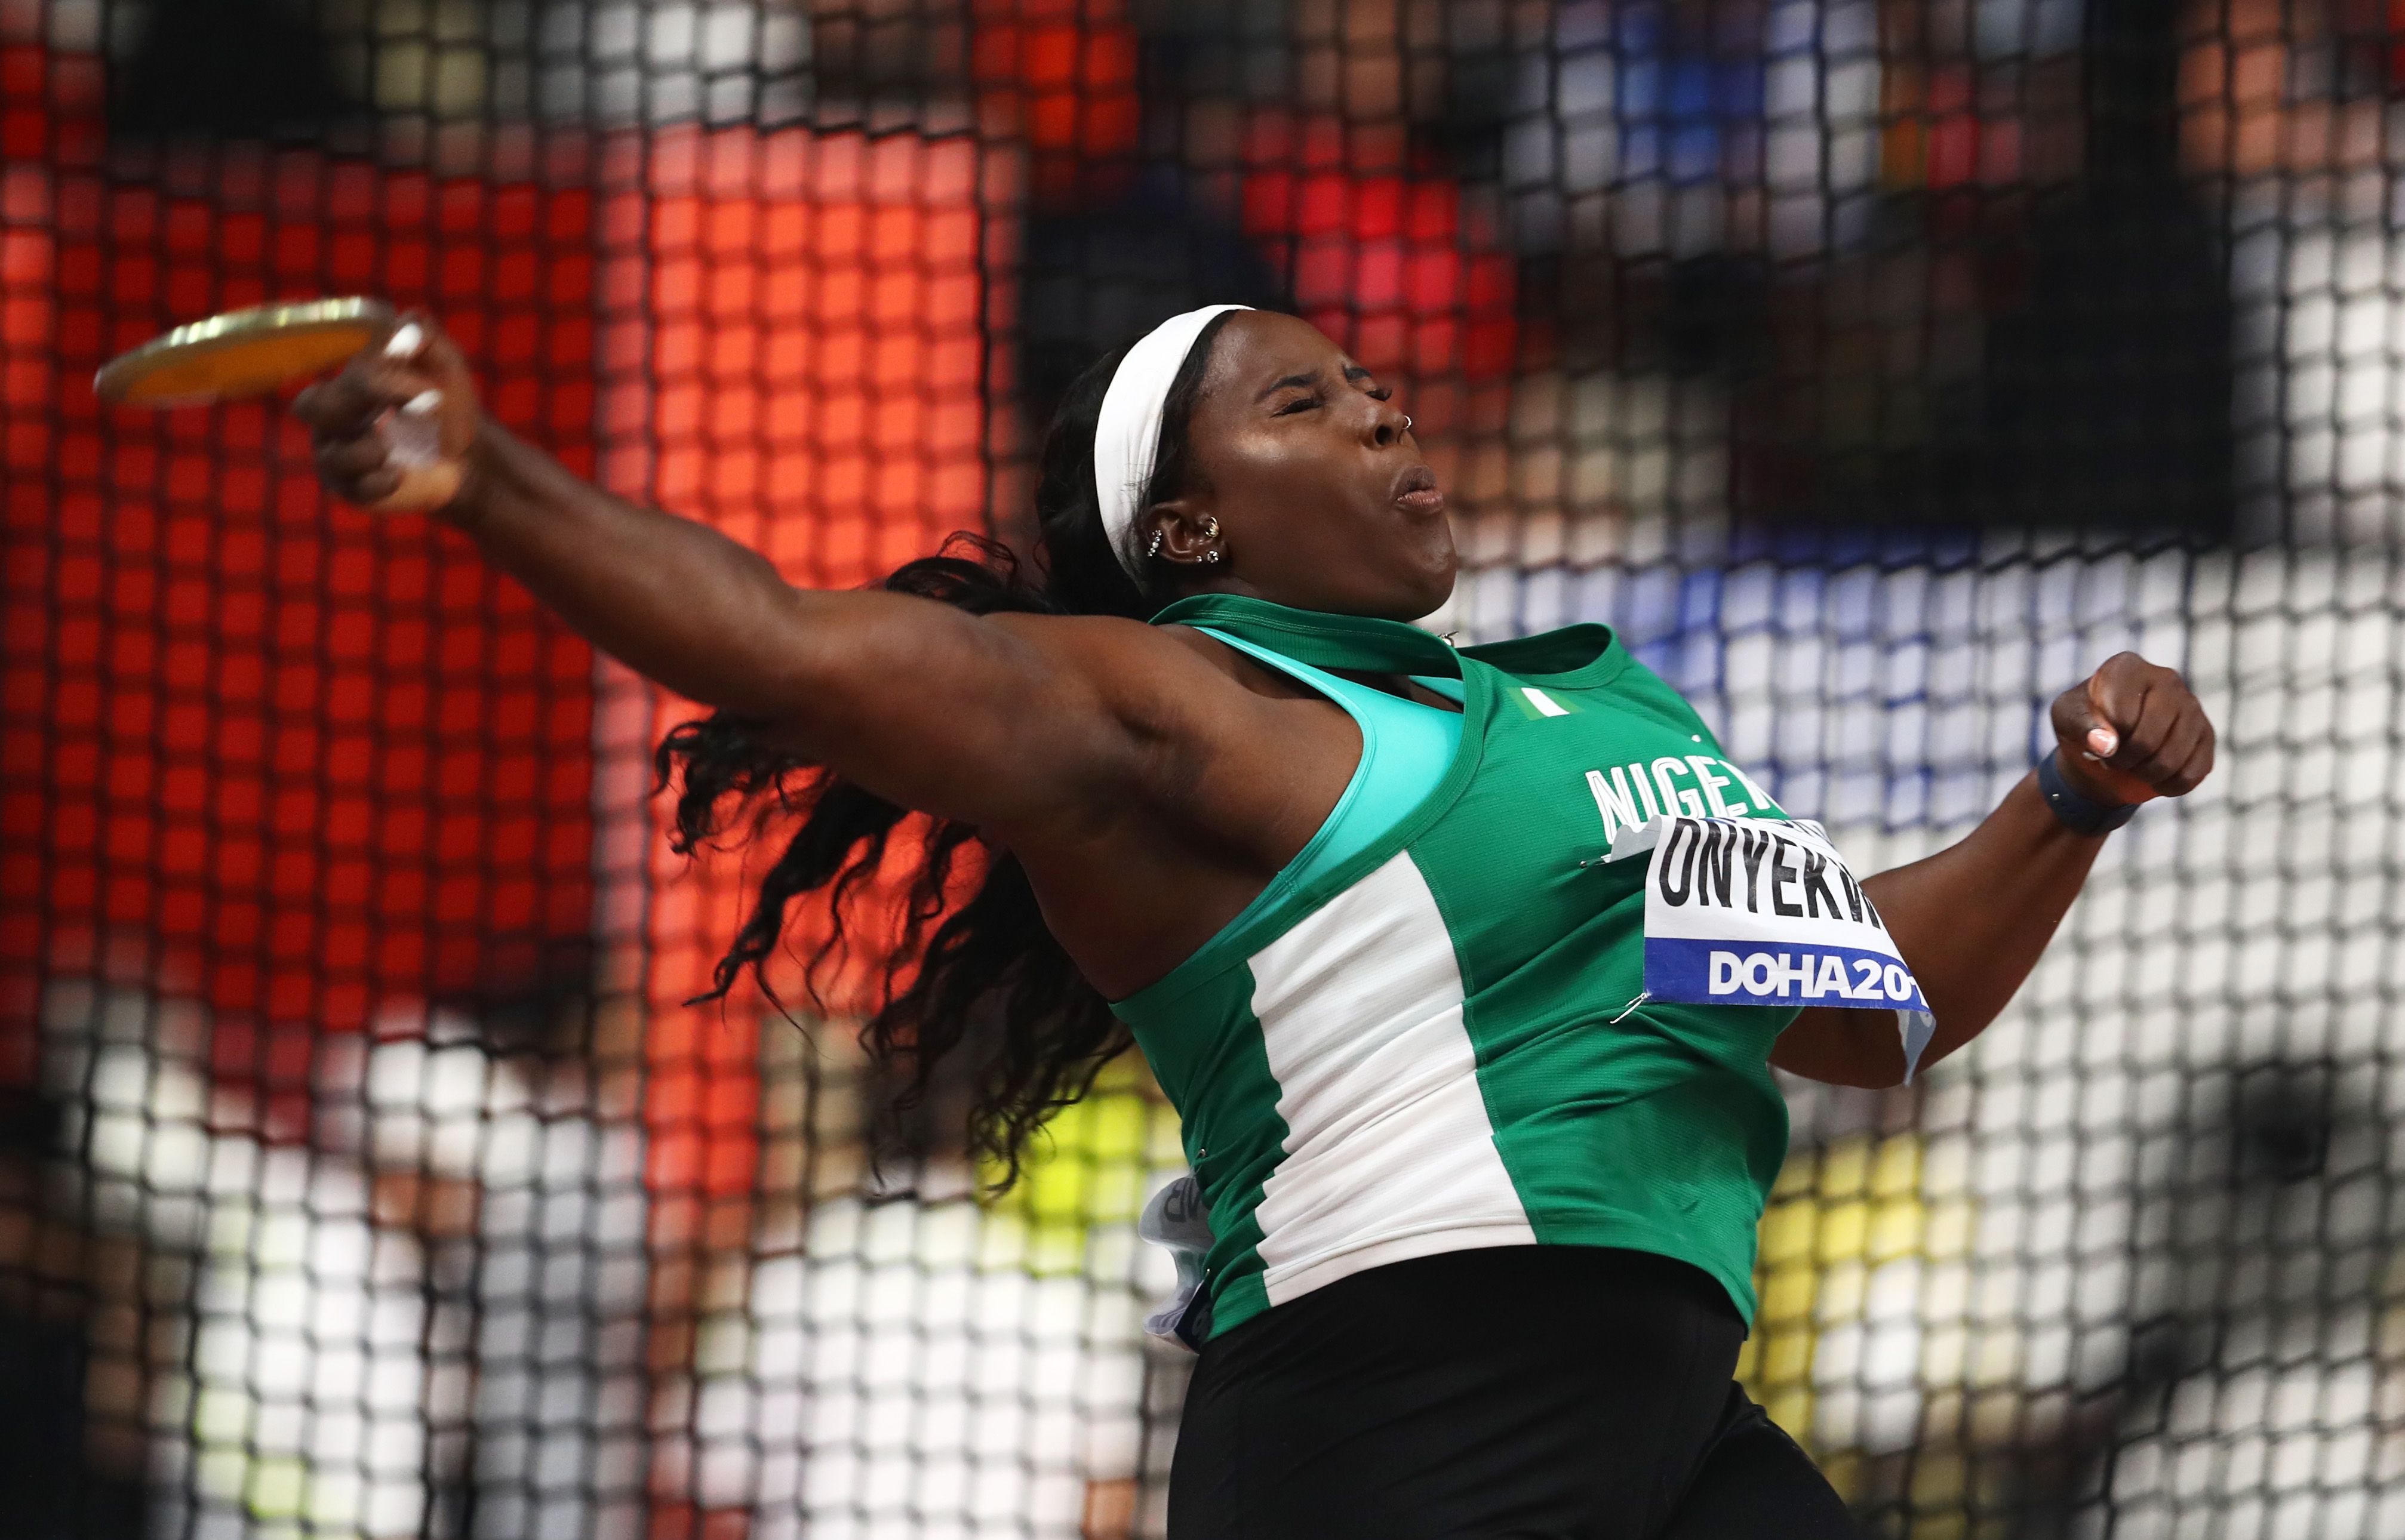 Chioma Onyekwere competes at the World Athletics Championships in Doha